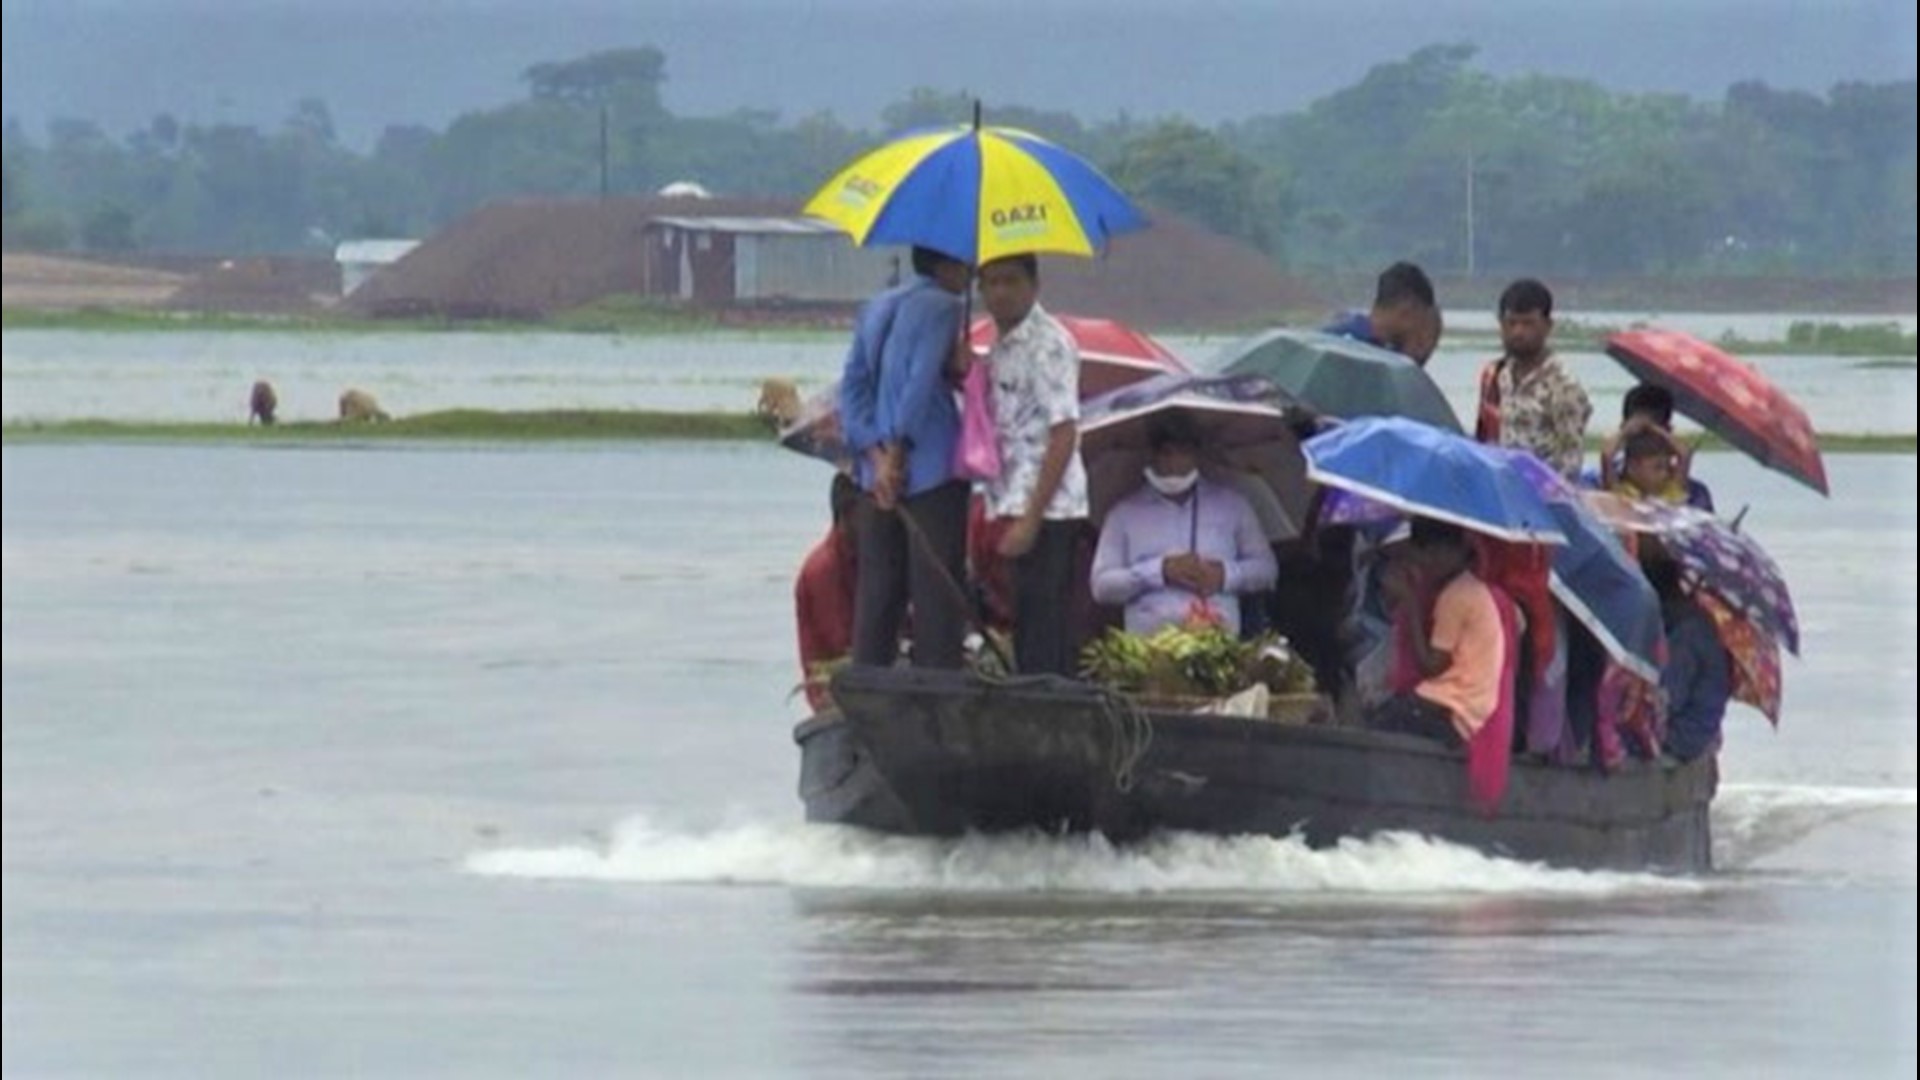 Heavy monsoon rainfall caused severe flooding for villagers in Tahirpur, Bangladesh, on July 15. This is some of the worst flooding they've seen in a decade.